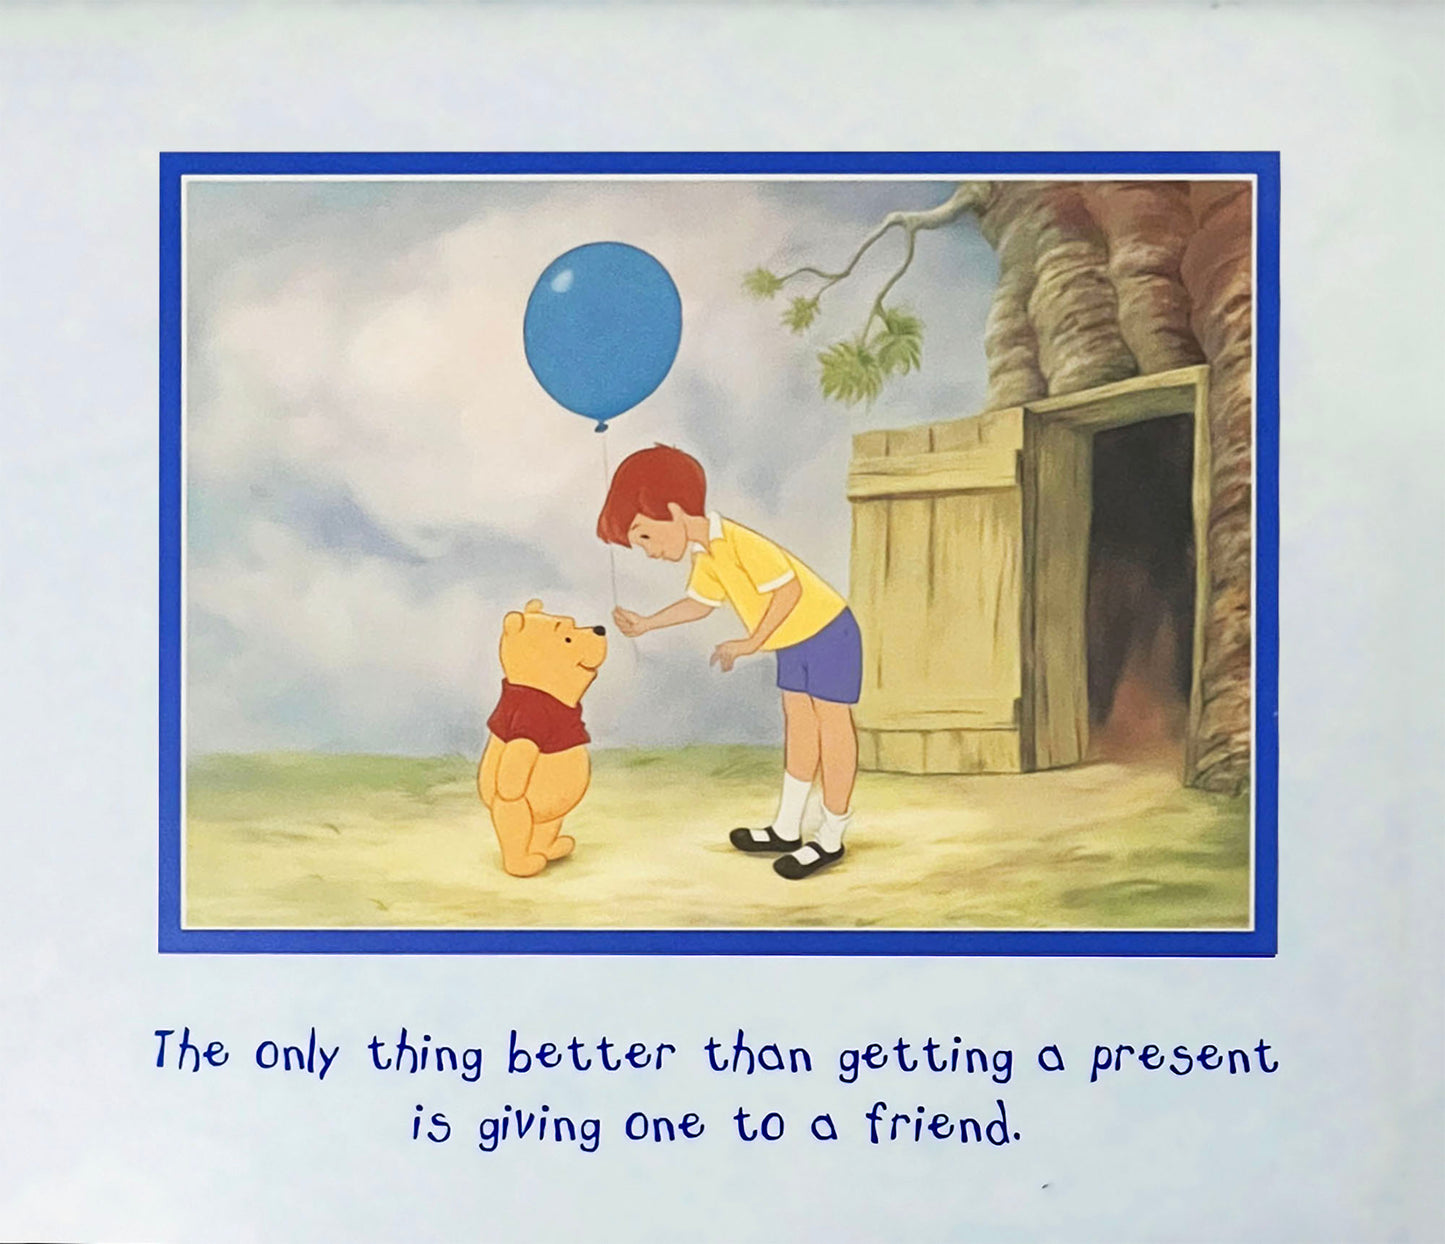 Christopher-Robin_-Winnie_-The-Only-Thing-Better-Than-Getting-A-Present-is-giving-one-to-a-friend.-Shop-eBargainsAndDeals.com